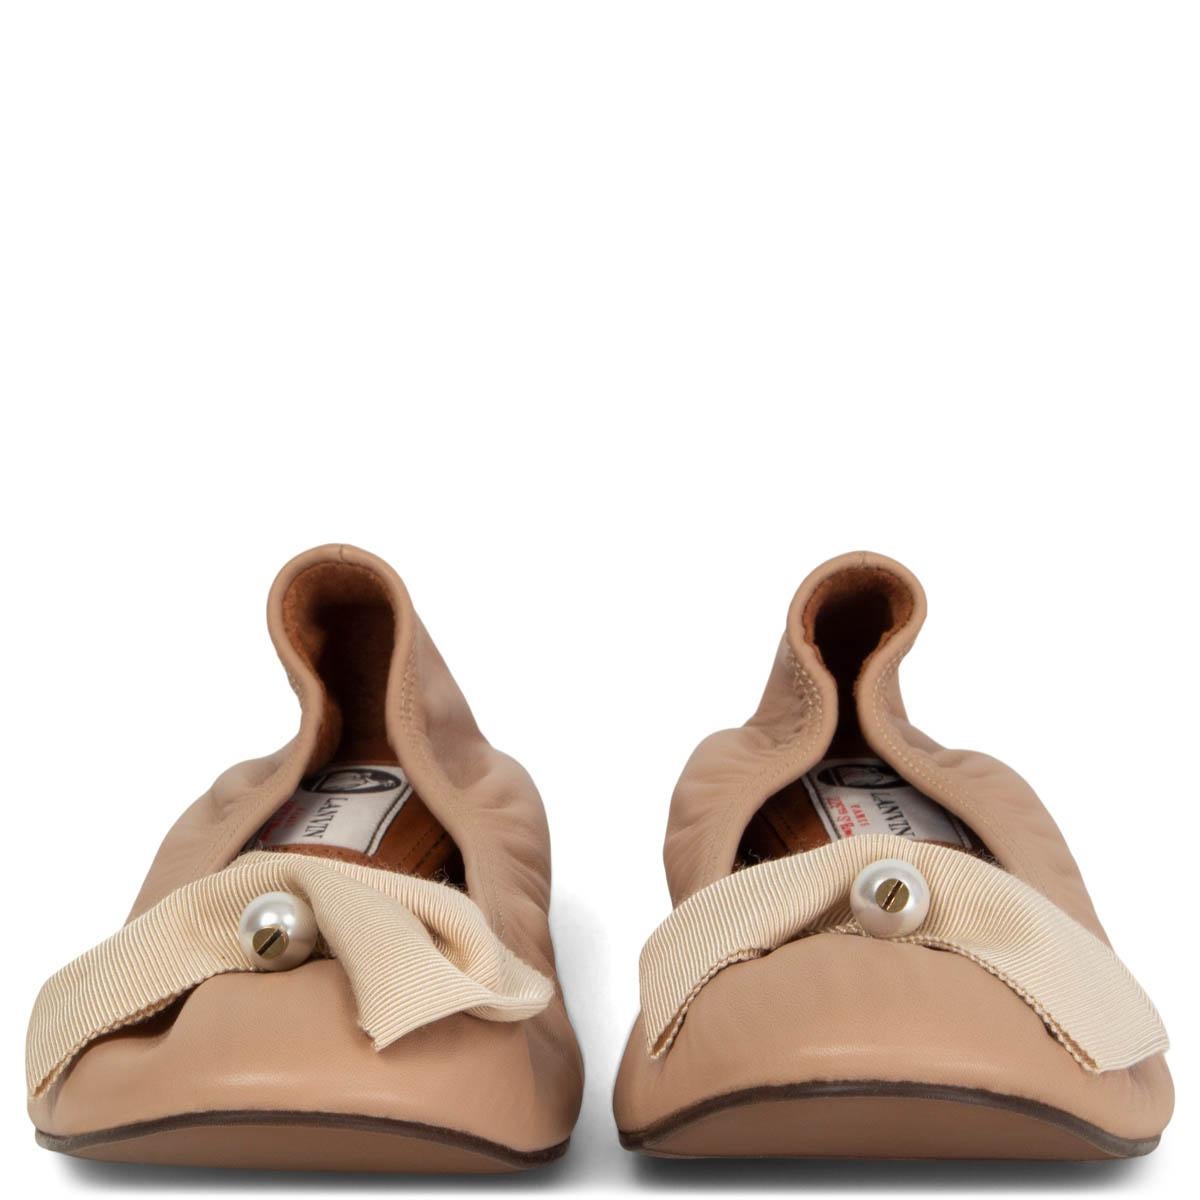 100% authentic Lanvin Ballet Flats in nude lambskin embellished with a grosgrain bow and pearl detail. Brand new. Come with dust bag. 

Measurements
Imprinted Size	42
Shoe Size	42
Inside Sole	26.5cm (10.3in)
Width	8cm (3.1in)

All our listings